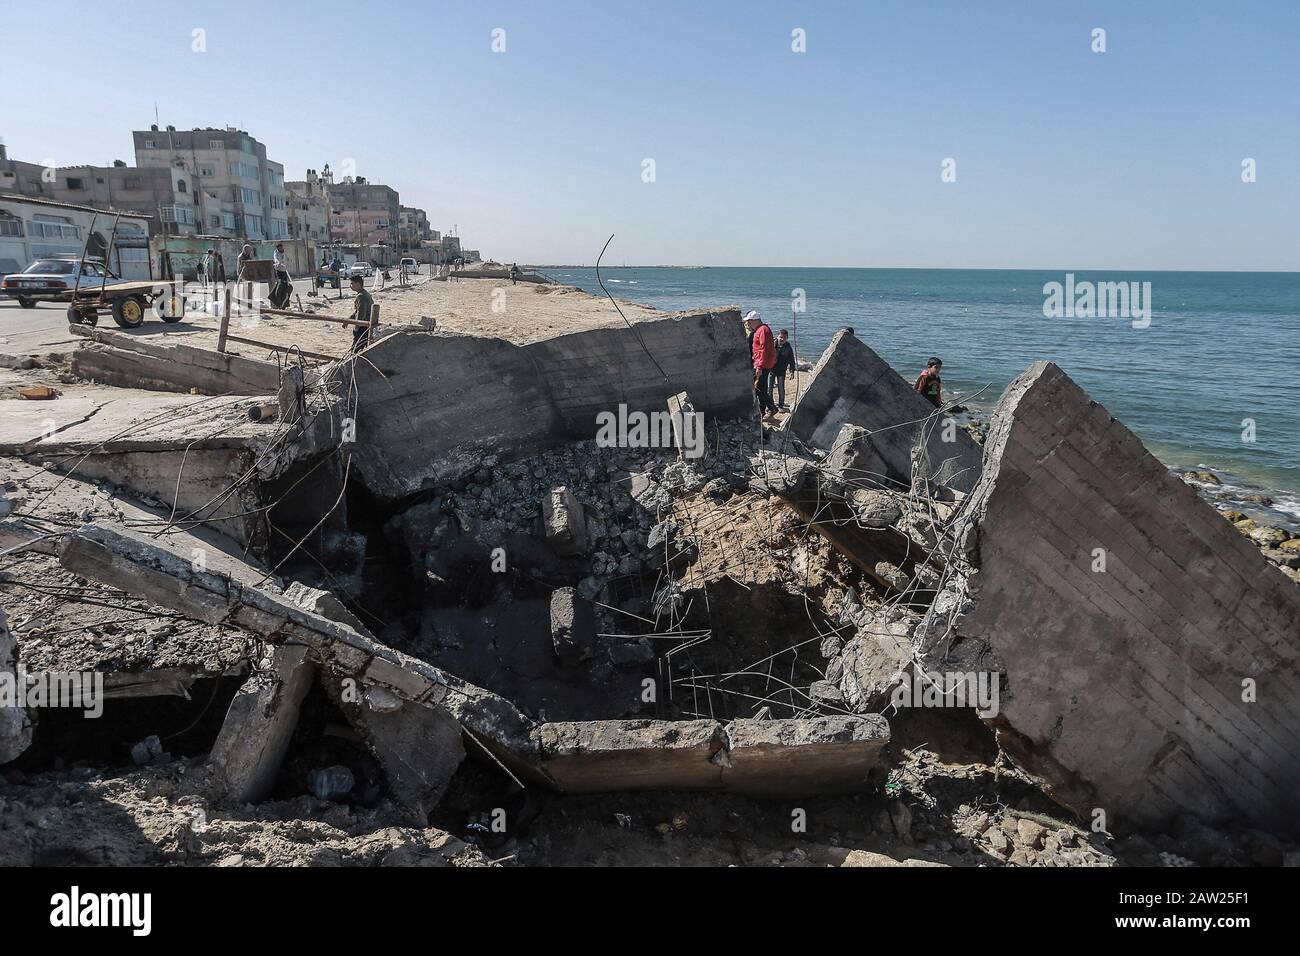 06 February 2020, Palestinian Territories, Gaza City: Palestinians inspect a site after it was targeted by Israeli airstrike at Al-Shati refugee camp in Gaza City. Photo: Mohammed Talatene/dpa Stock Photo